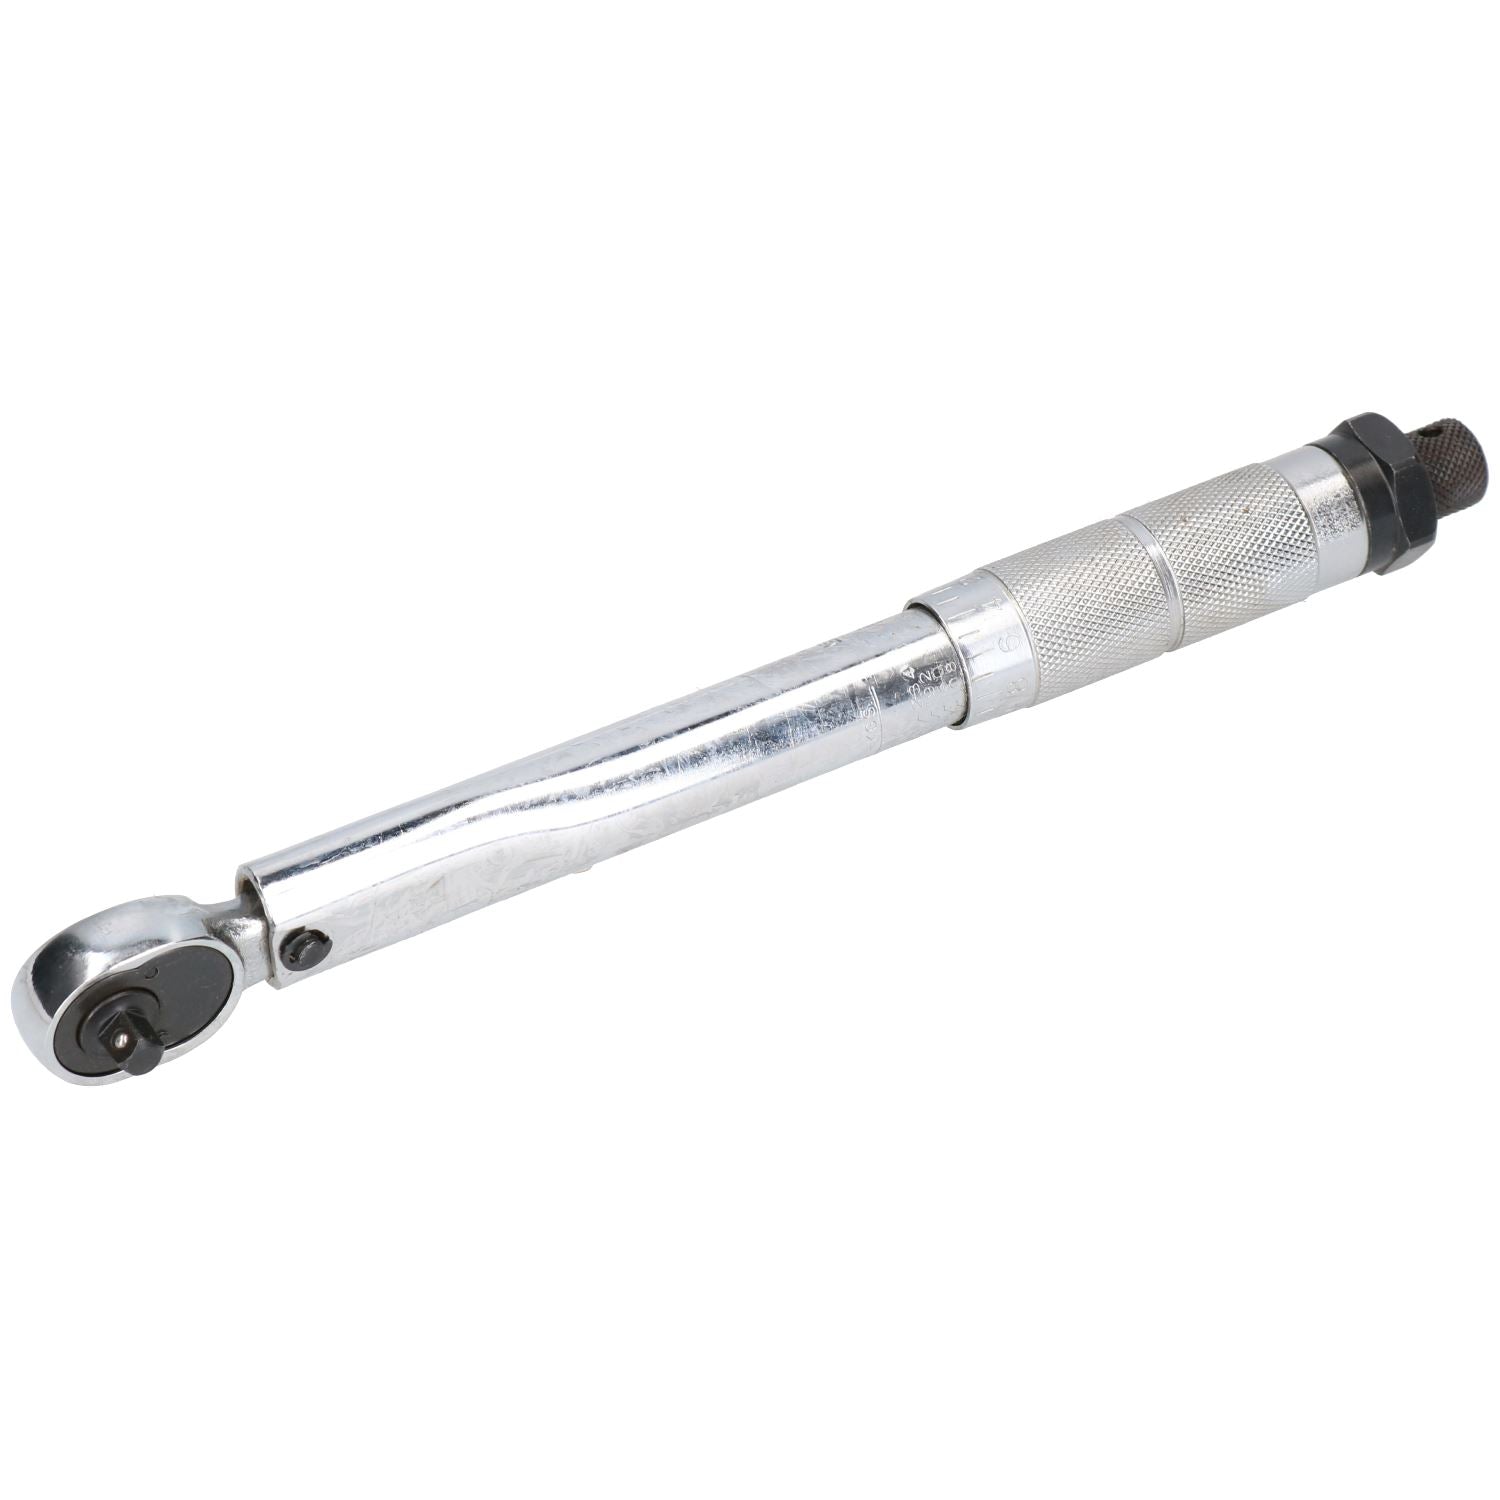 1/4" drive click torque wrench 5 - 25Nm / 4 - 18 ft/lbs by U.S.PRO TOOLS AT431